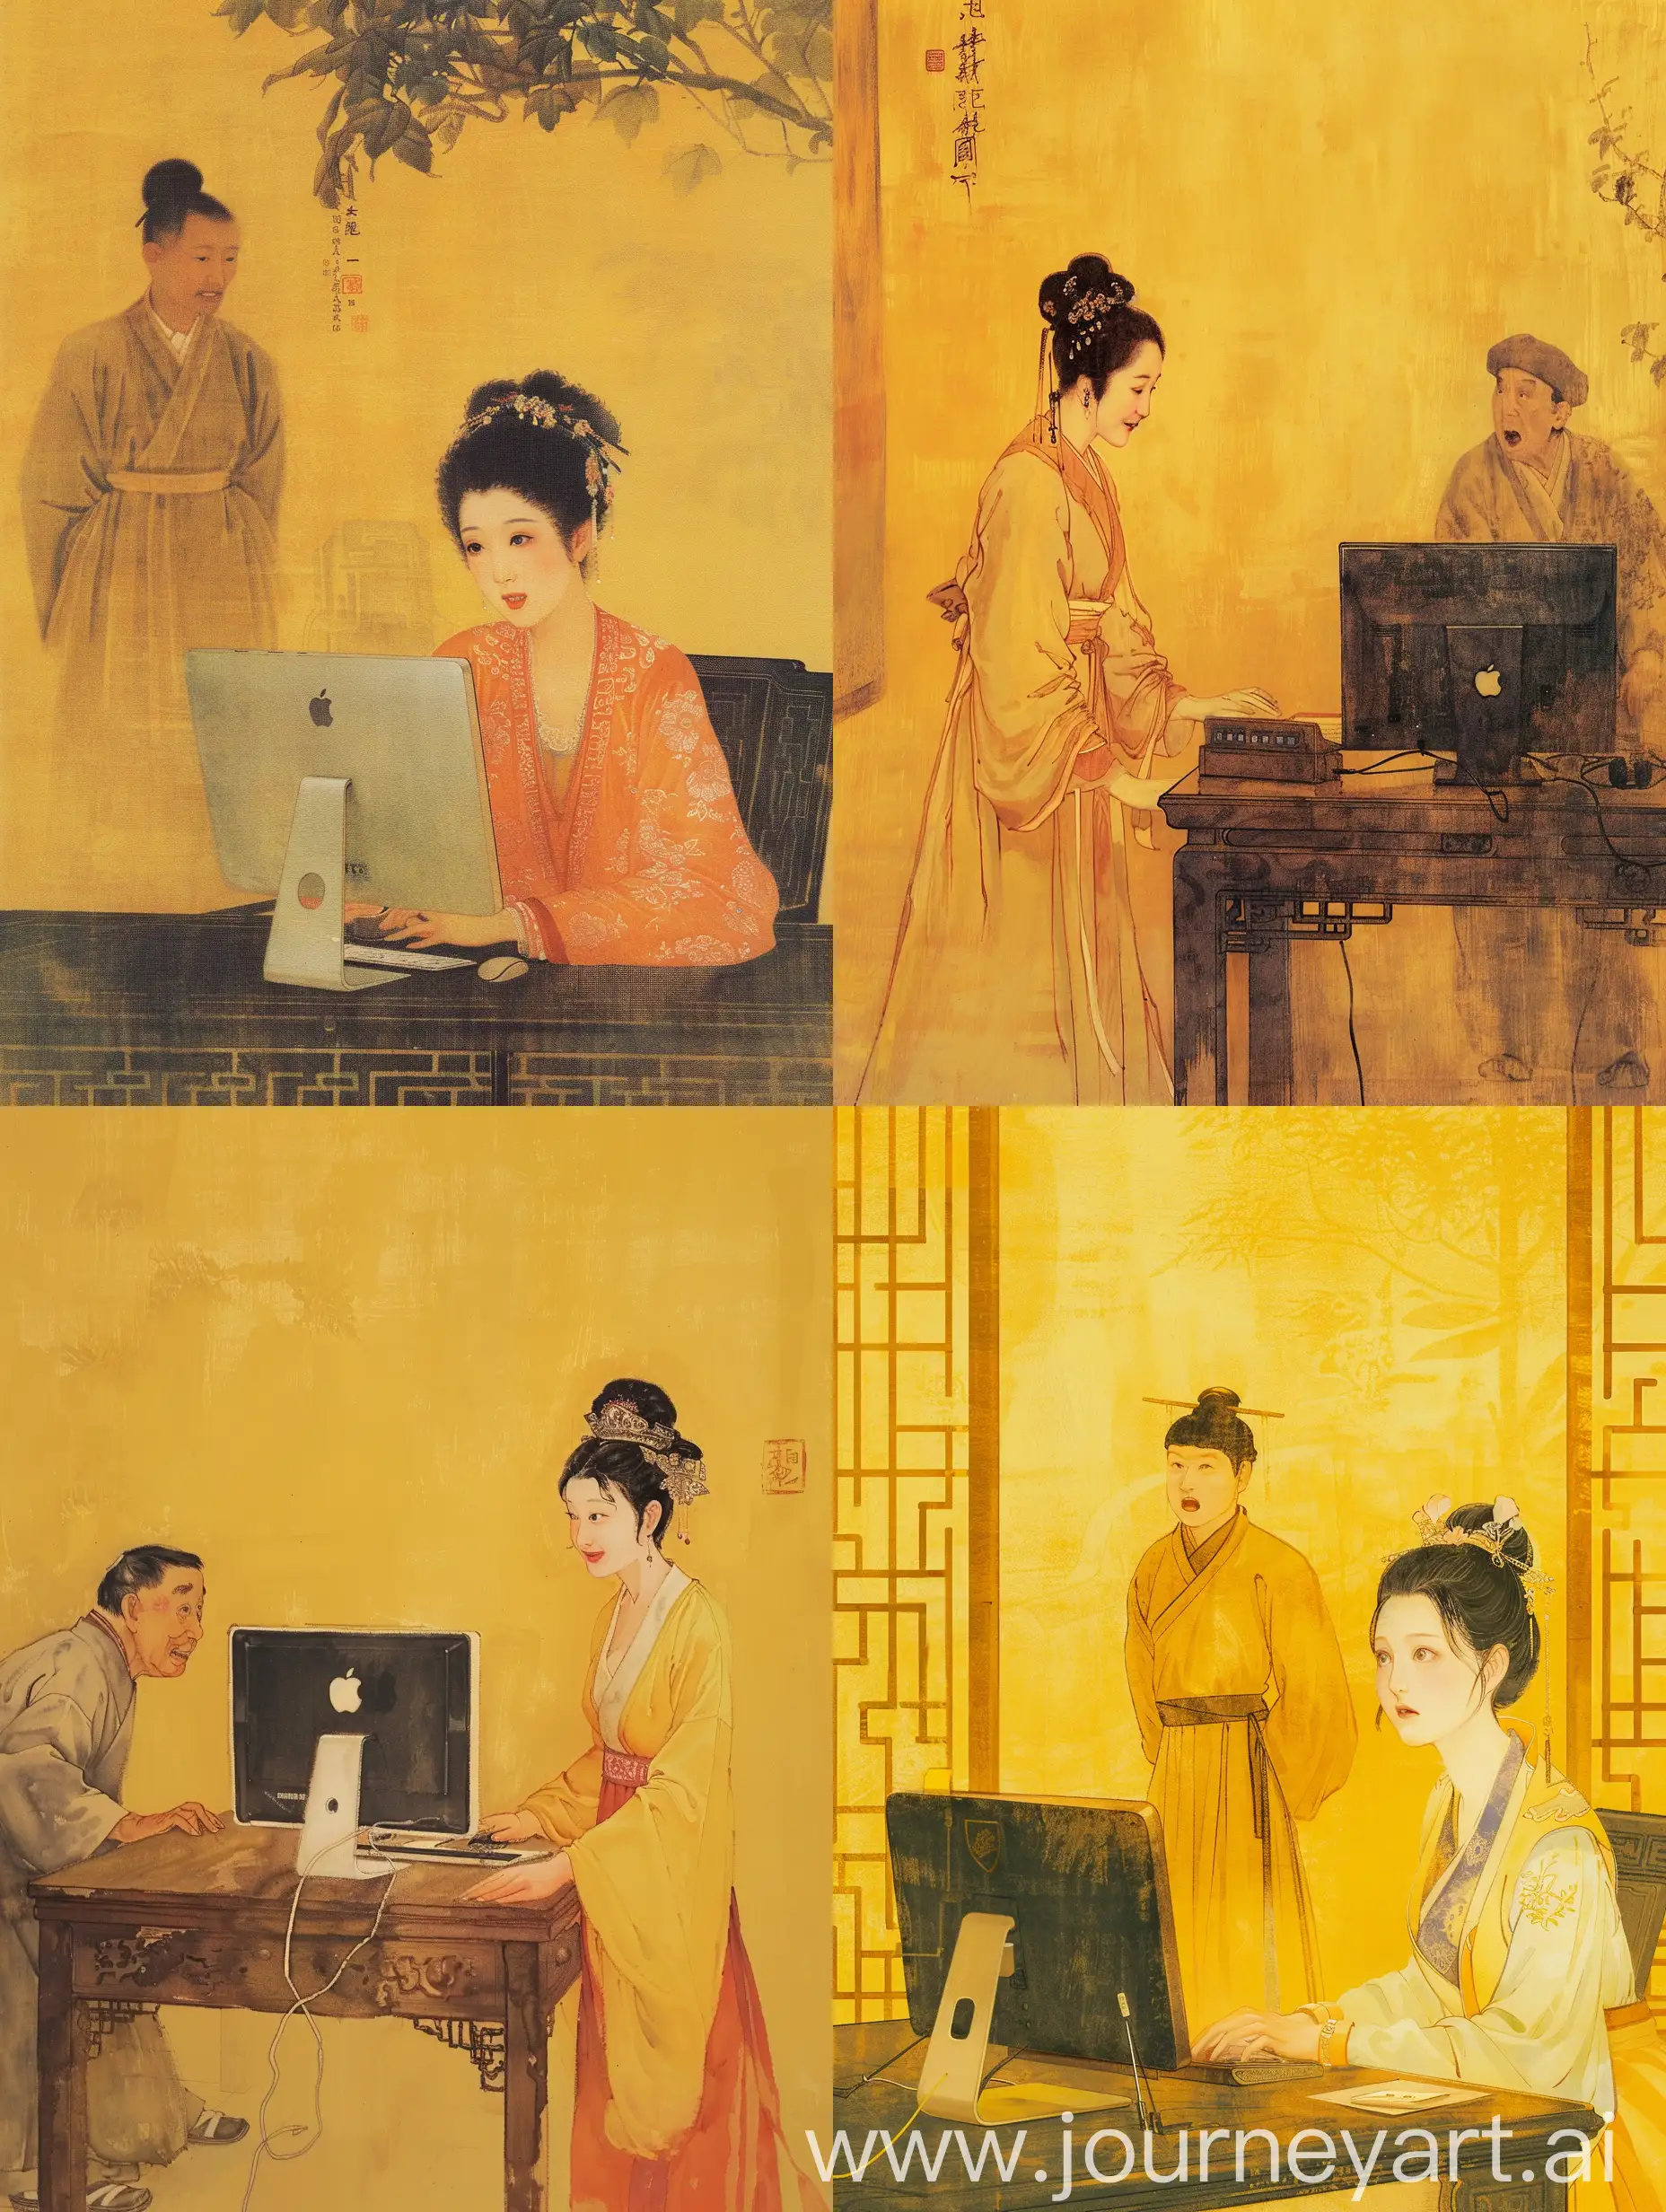 An ancient Chinese Song Dynasty painting depicting (An elegant woman uses an Apple computer at the desk, while the servant peeks in surprise from behind). yellow scene, Song Dynasty literary and artistic imagery, traditional gongbi painting, light amber and dim tones, historical and nostalgic atmosphere.